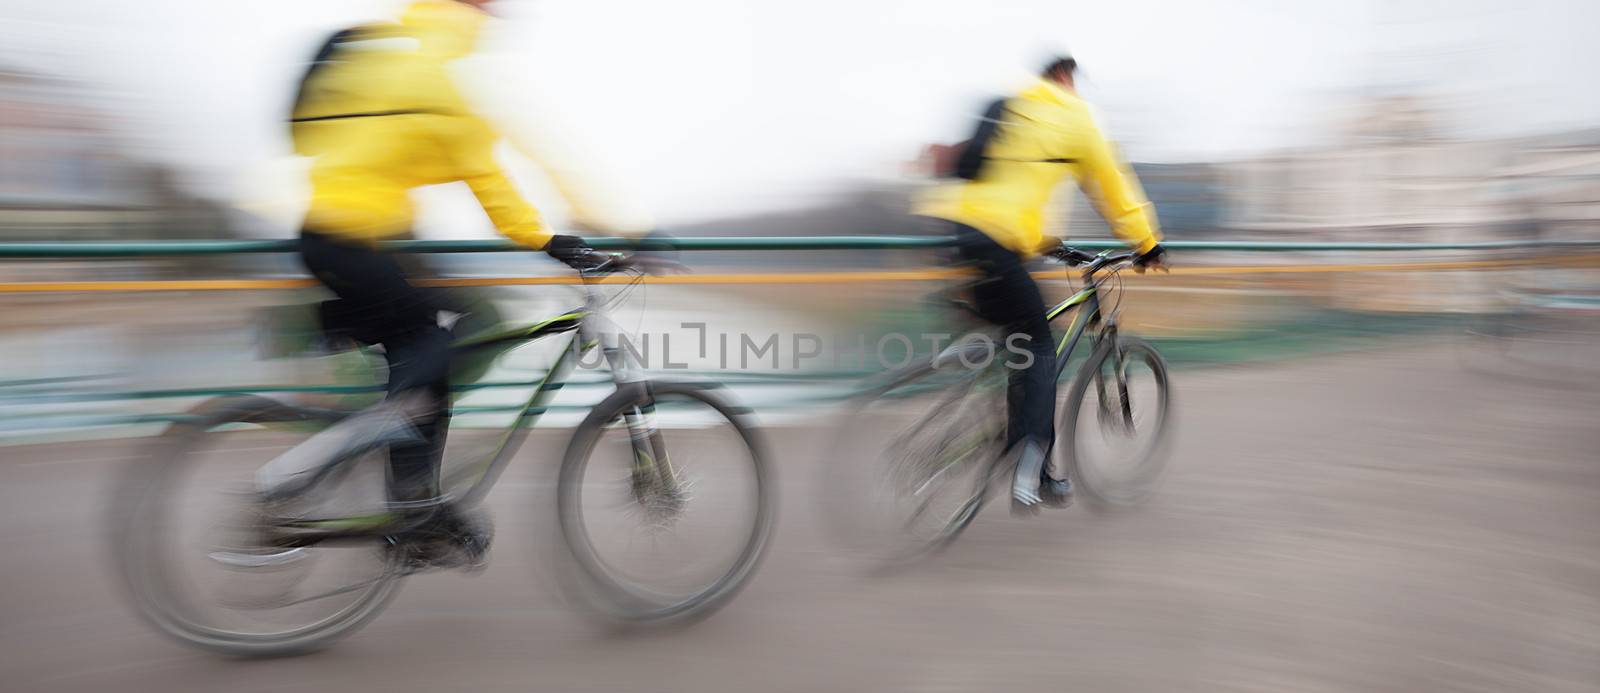 Abstract image of two cyclists on the city roadway. Intentional motion blur